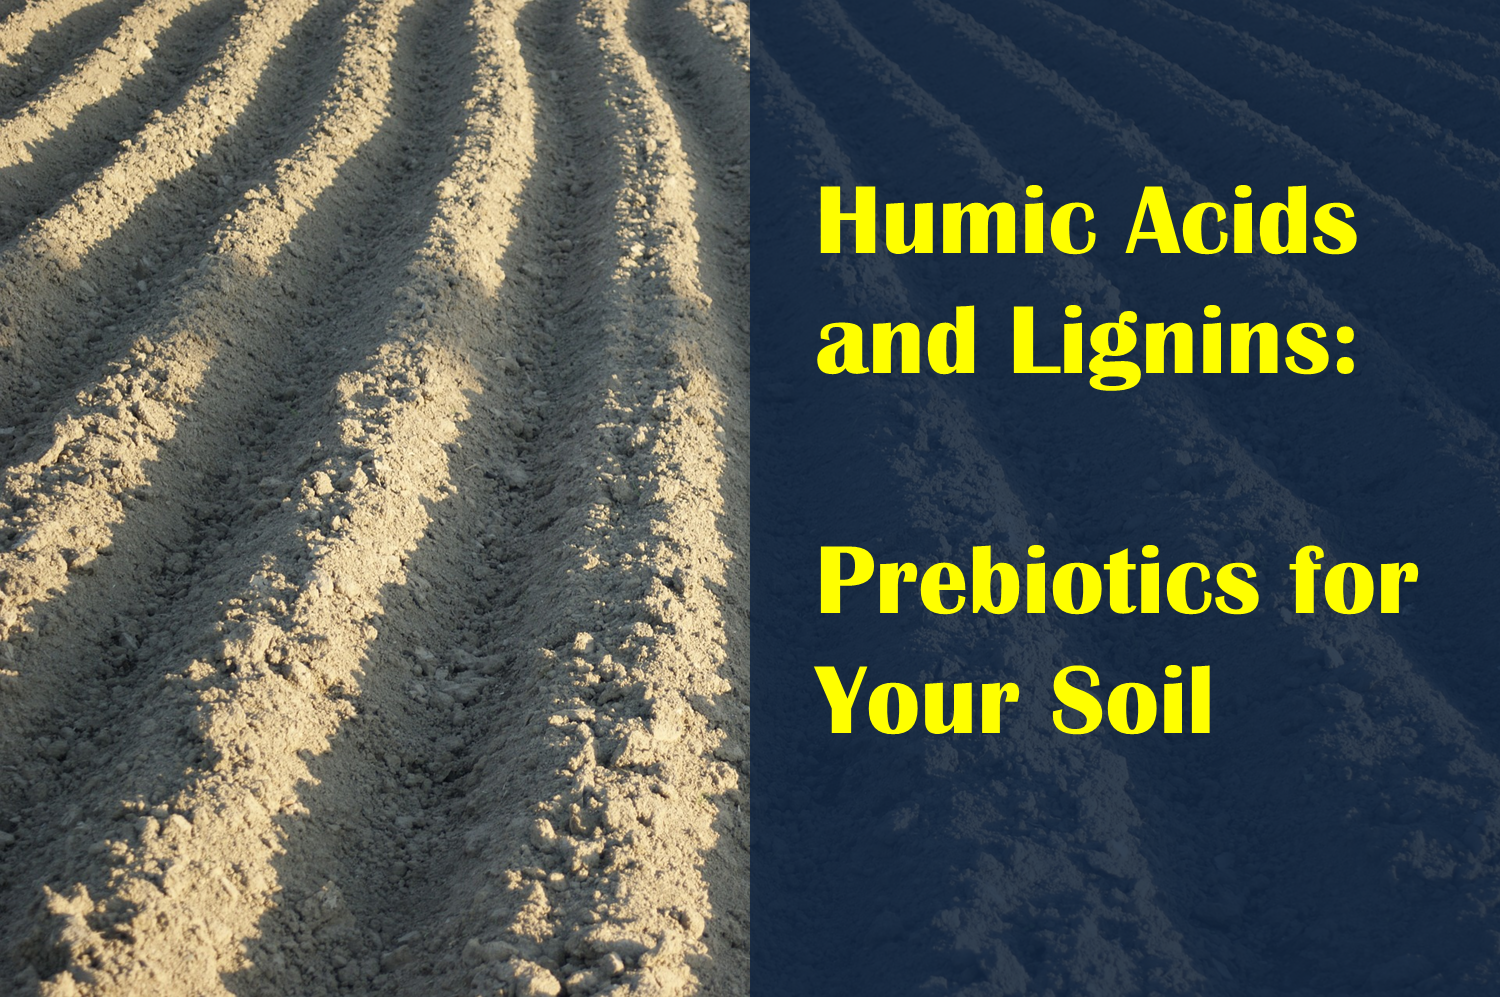 Humic Acids and Lignins are like Prebiotics for Soil